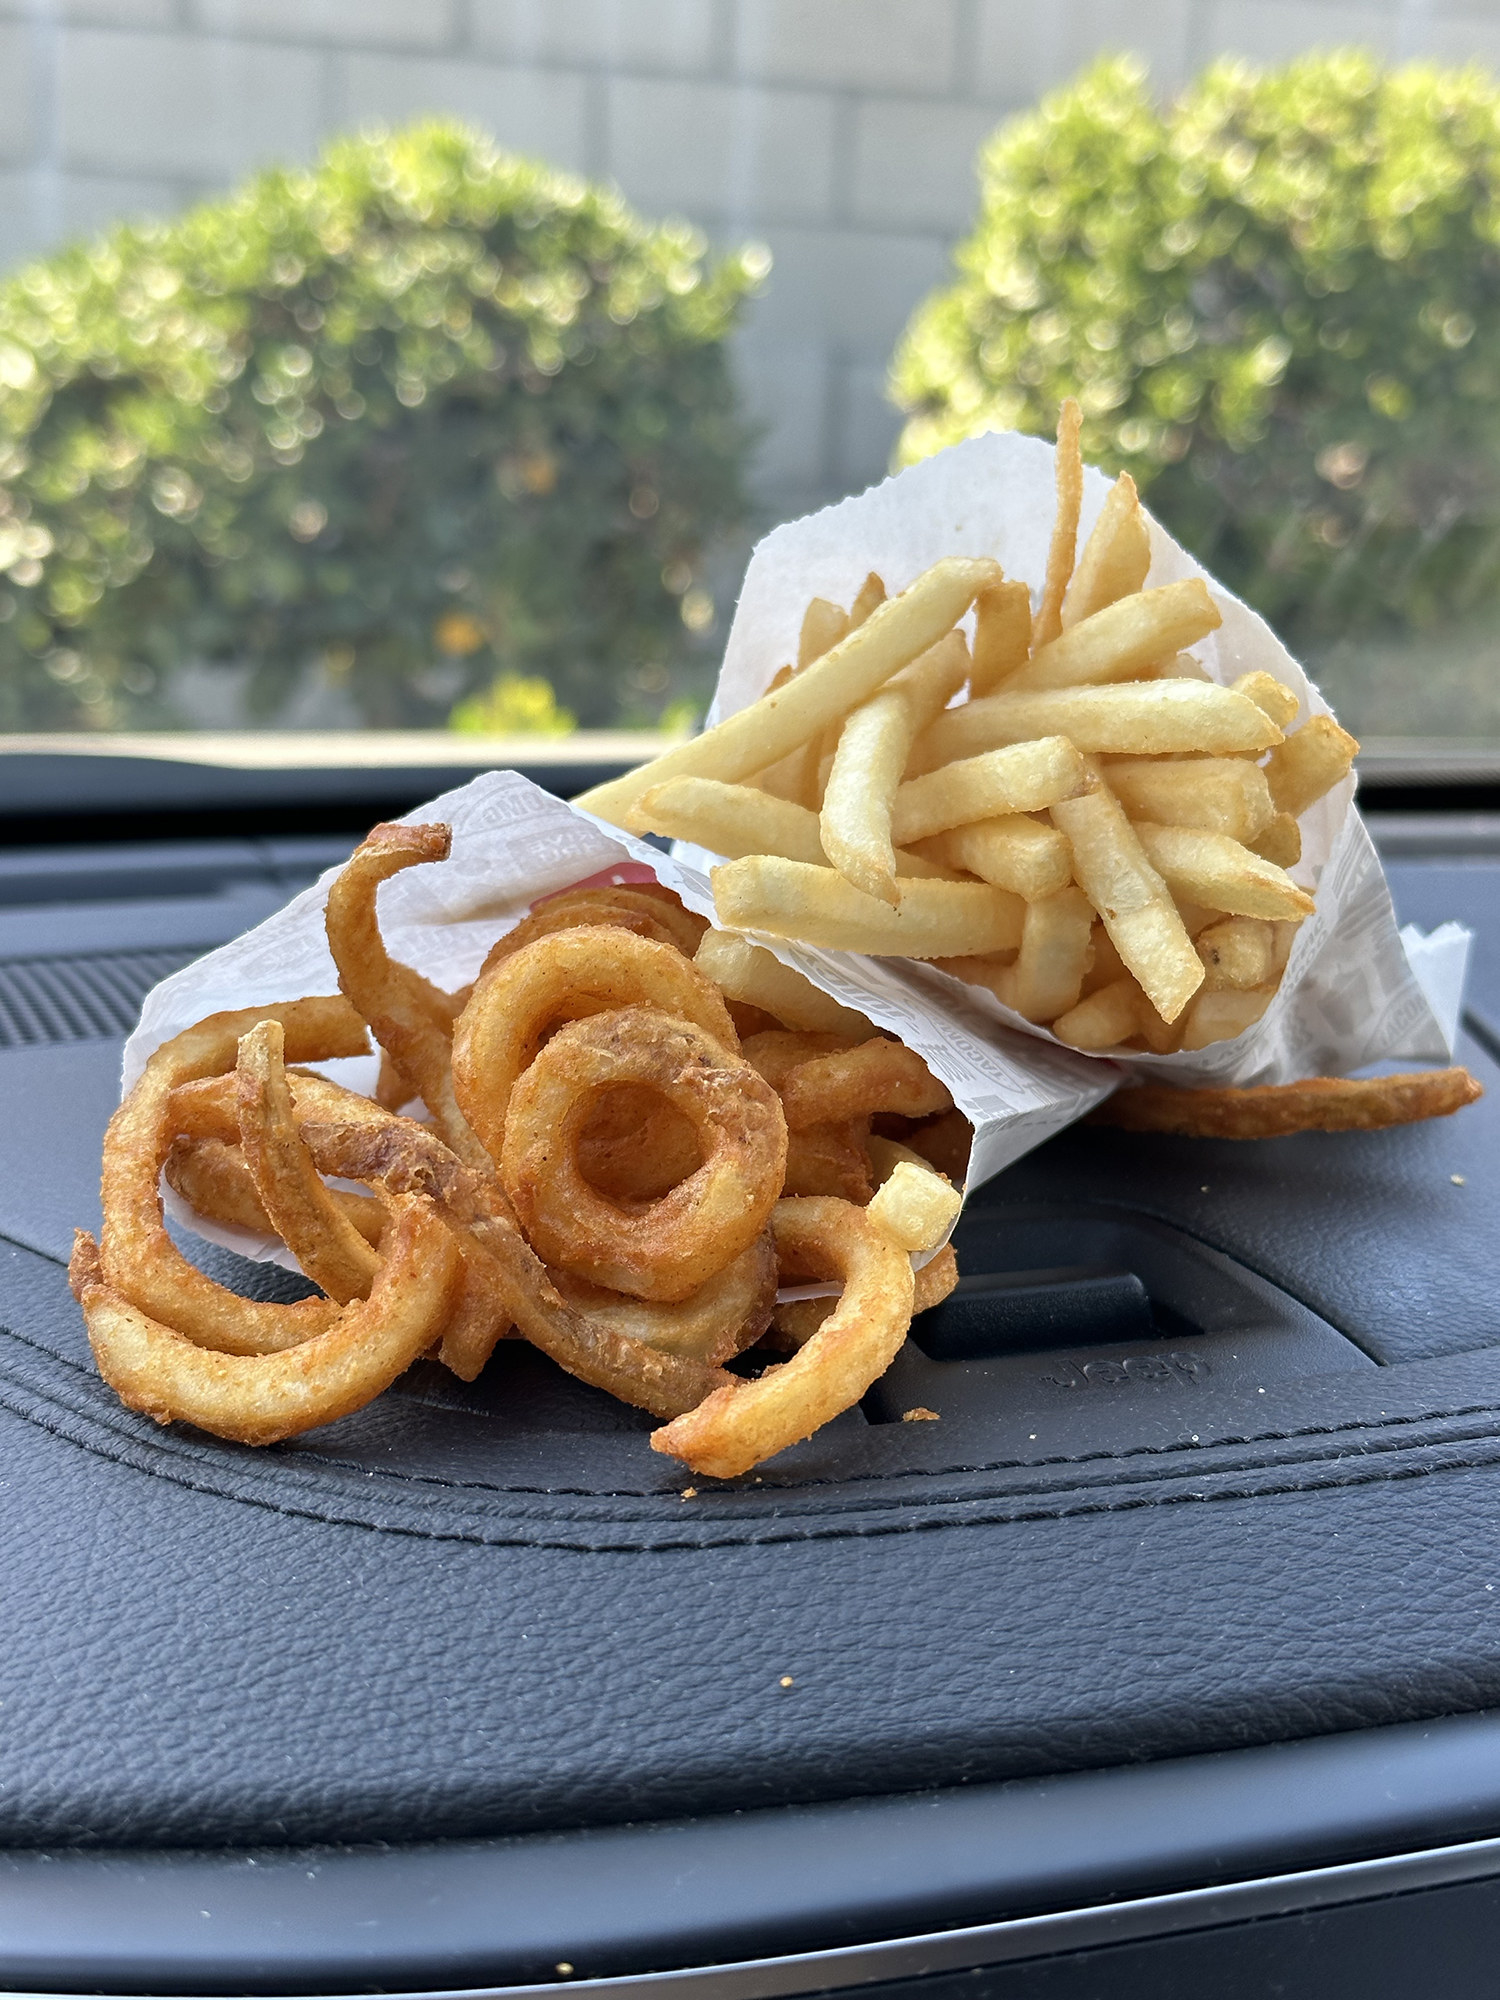 Jack in the Box fries